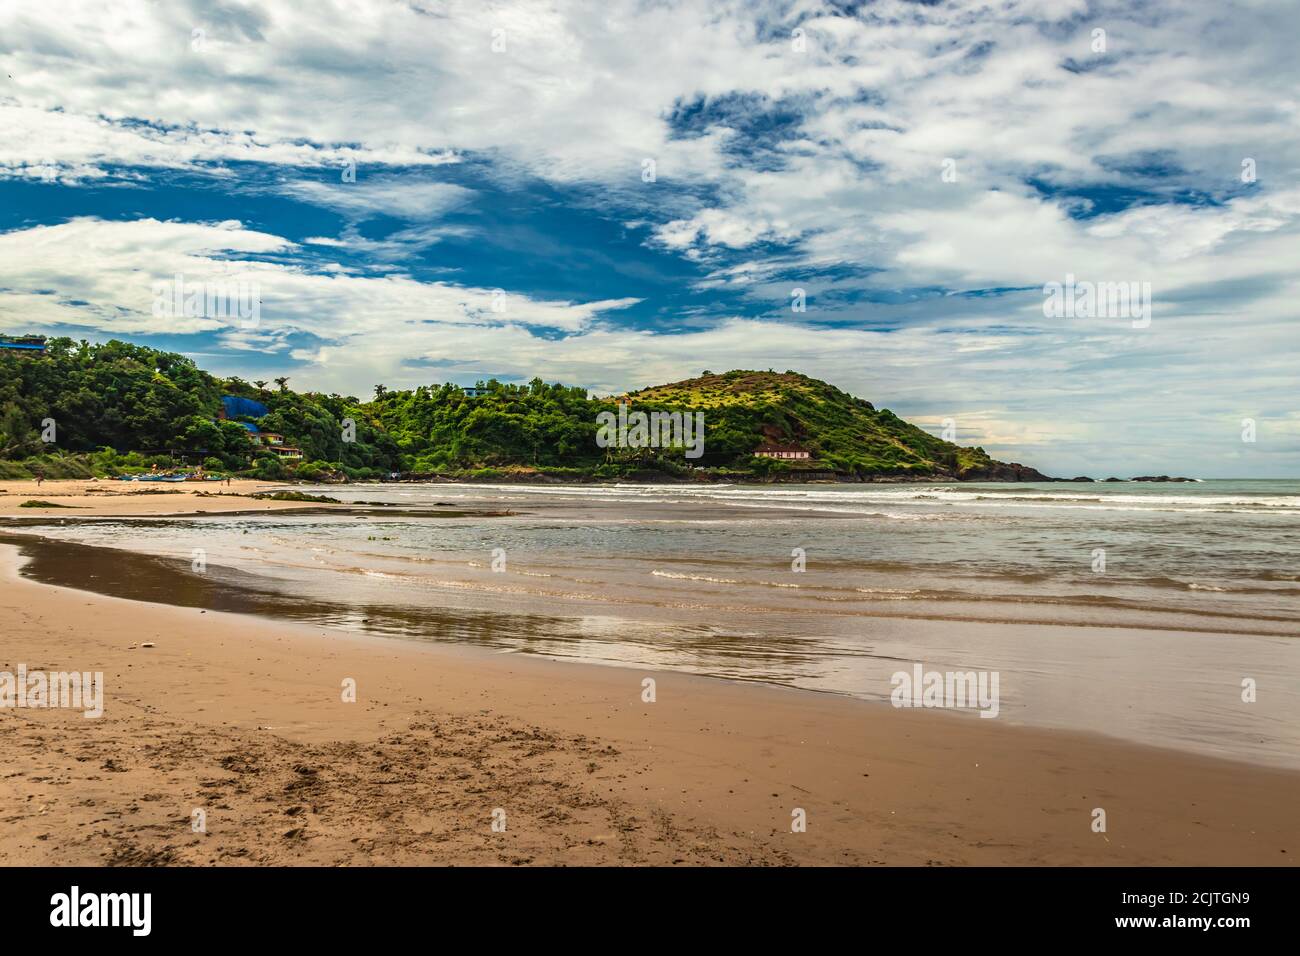 beach with mountain and amazing sky at morning from flat angle image is taken at gokarna beach karnataka india. it is one the best beach of gokarna. Stock Photo